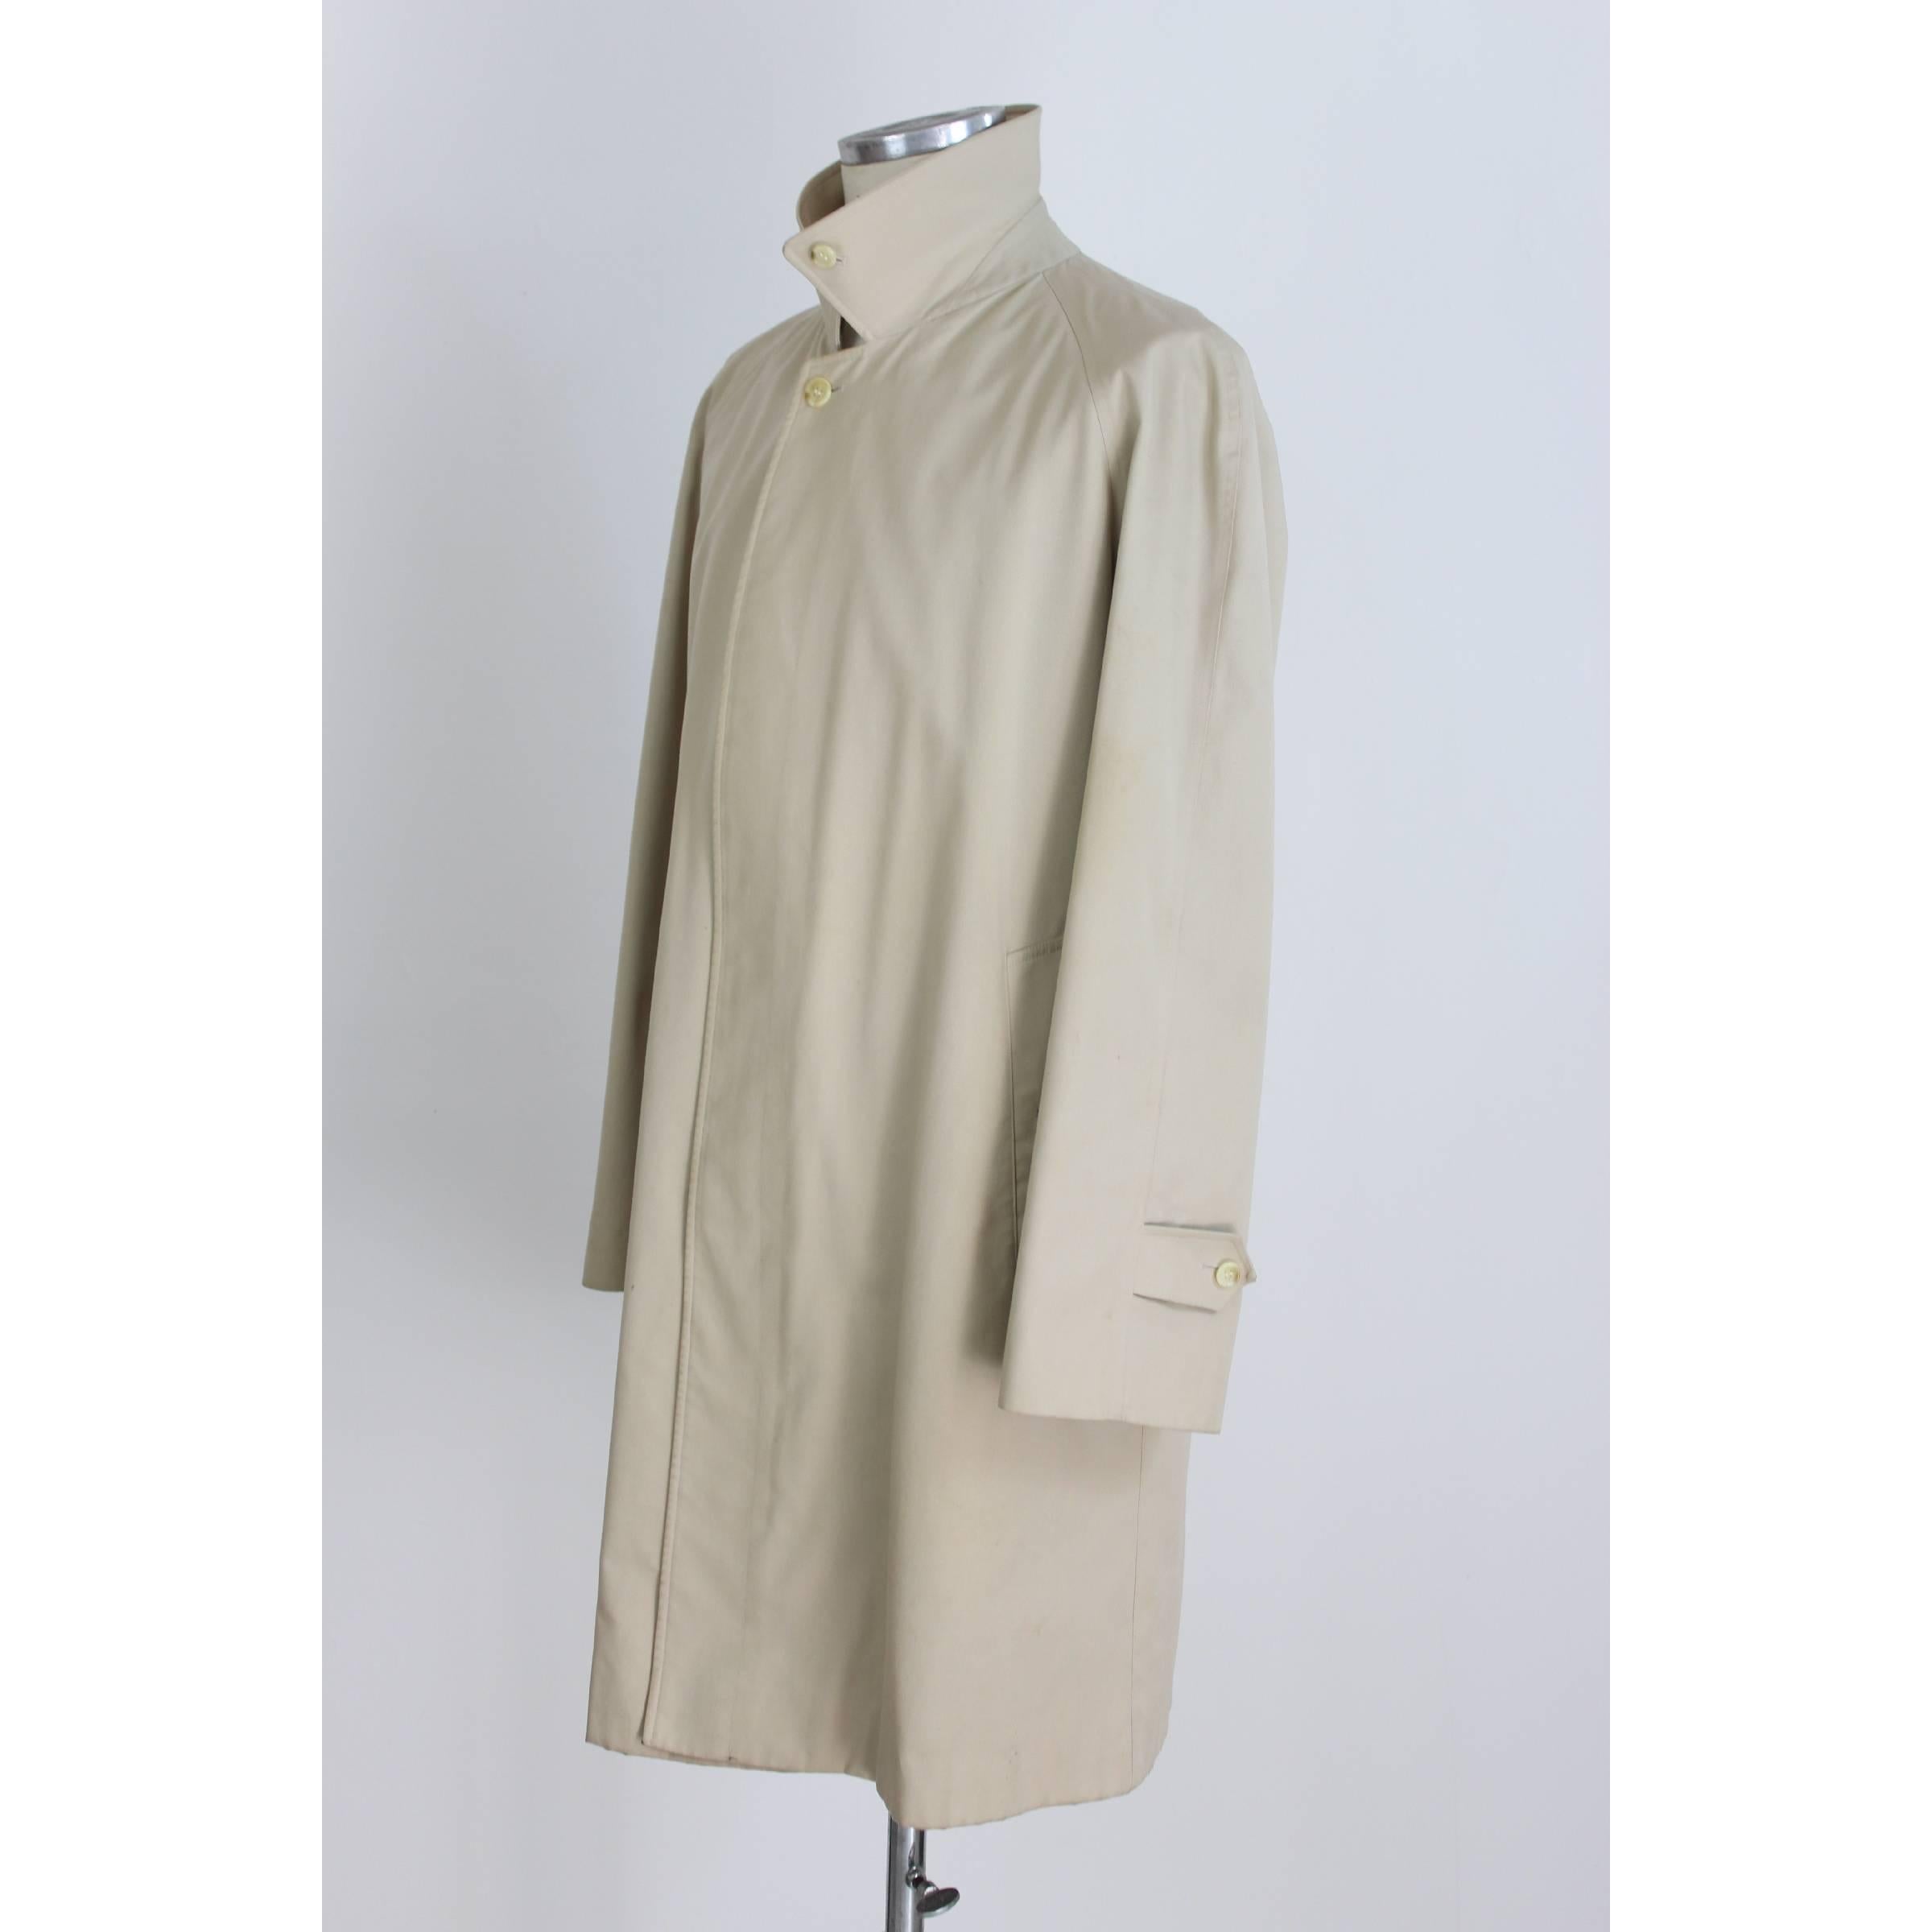 Burberry London beige raincoat for men. Beige. Two side pockets, button closure. There are some spots that do not compromise the beauty of the garment. Very good vintage conditions. Made in England.

Size 50 It 40 Us 40 Uk

Shoulders: 50 cm
Chest /